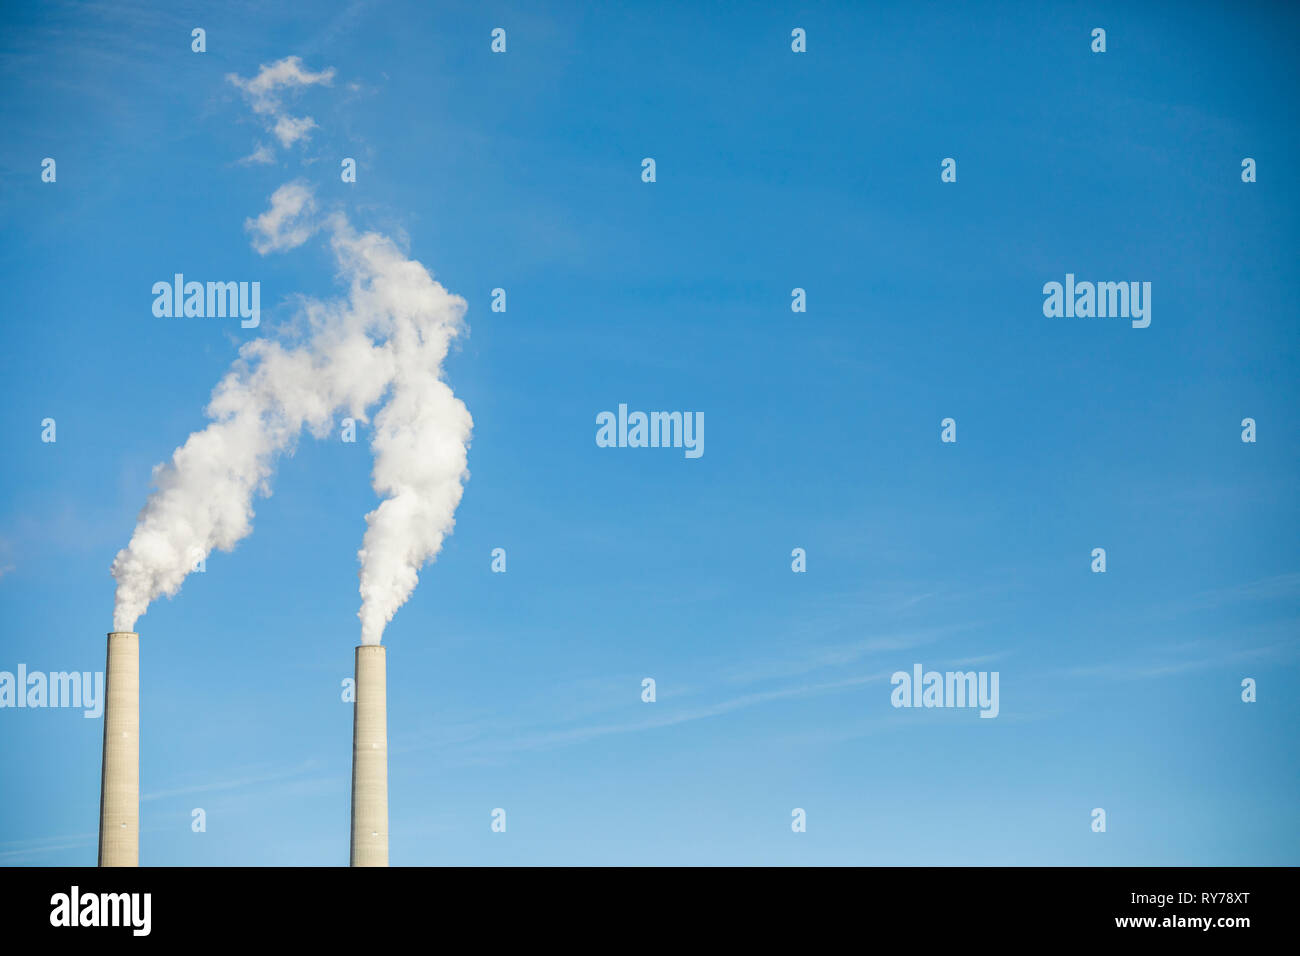 Low angle view of smoke emitting from chimneys against blue sky Stock Photo